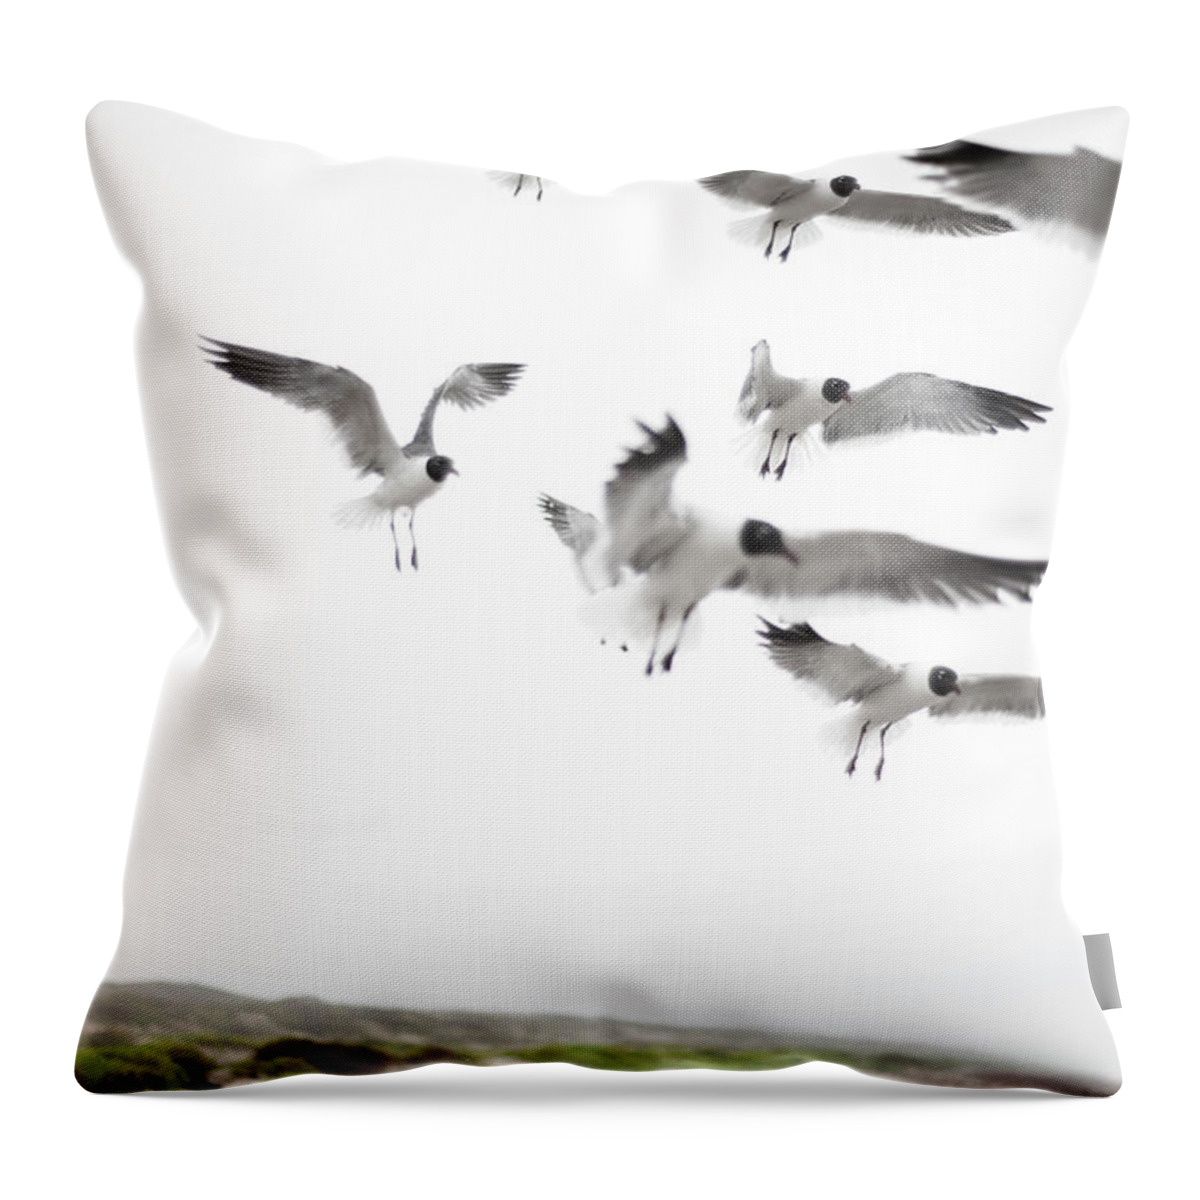 Animal Themes Throw Pillow featuring the photograph Flock Of Seagulls by Olga Melhiser Photography